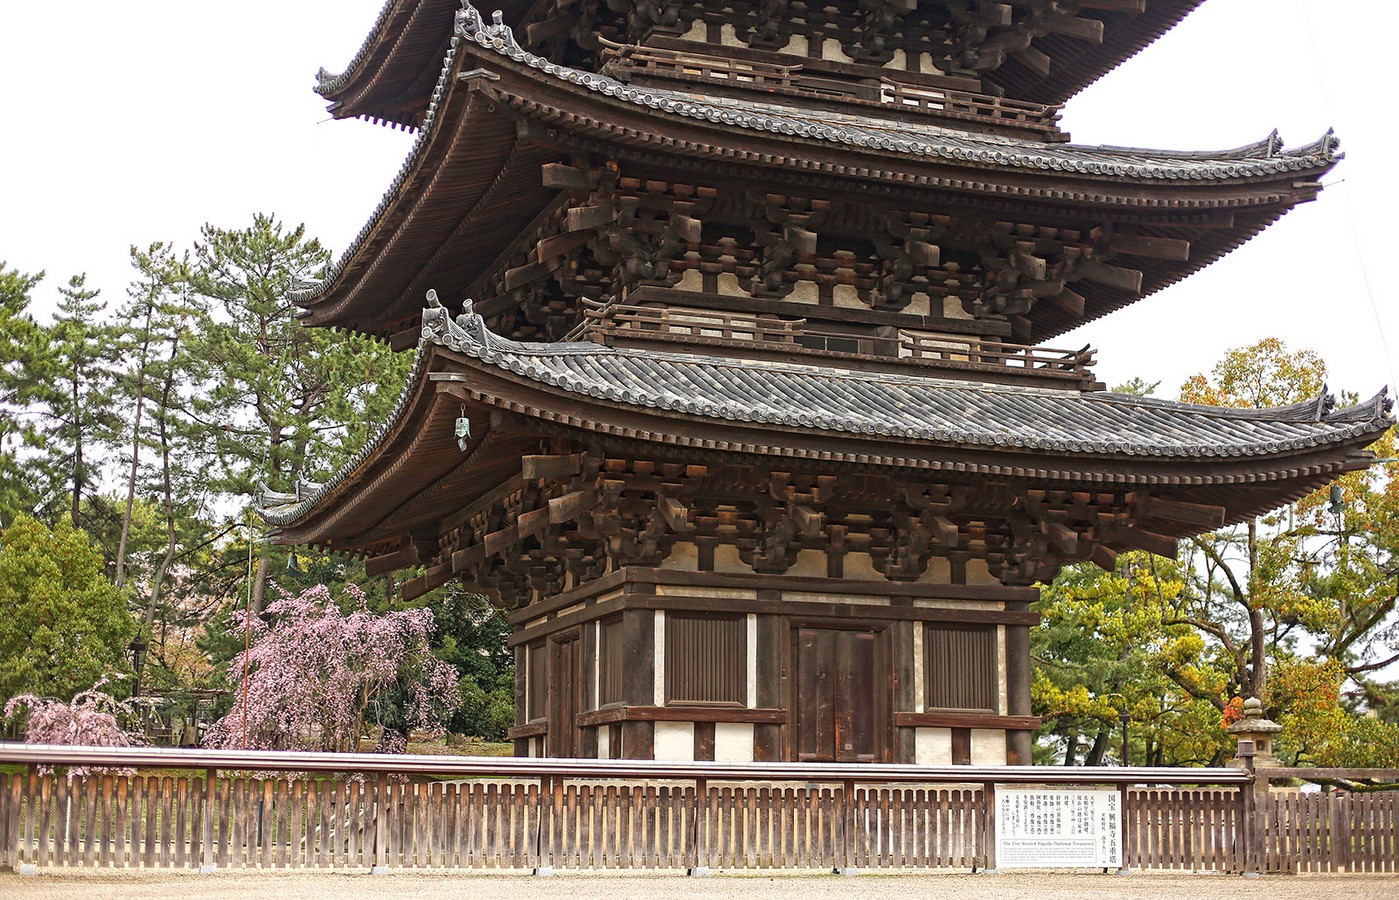 Architecture of Cities: Nara- The Historic City of Japan - Sheet3